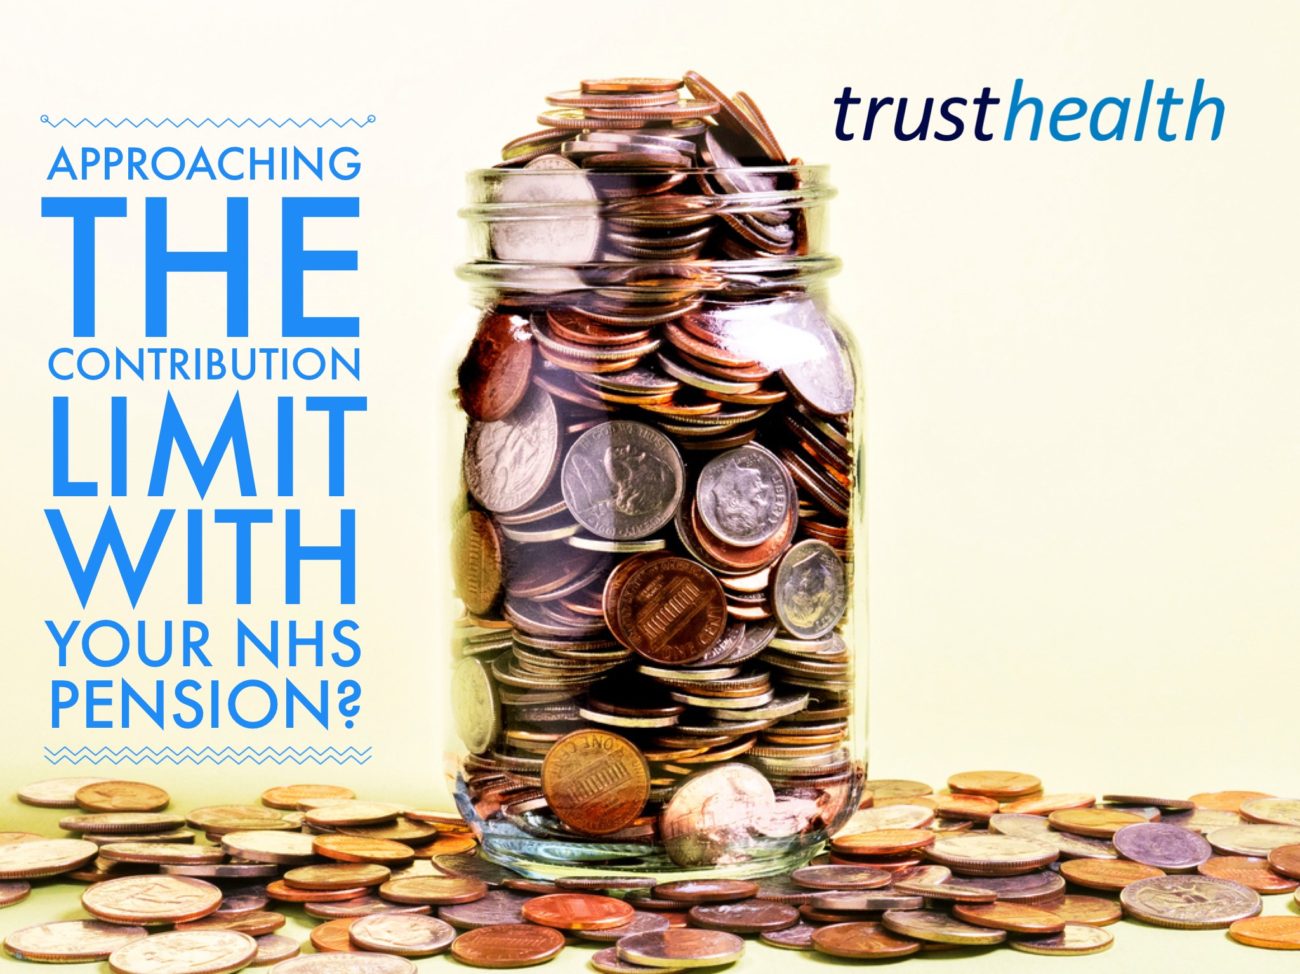 Are you worried about topping out on your NHS pension?